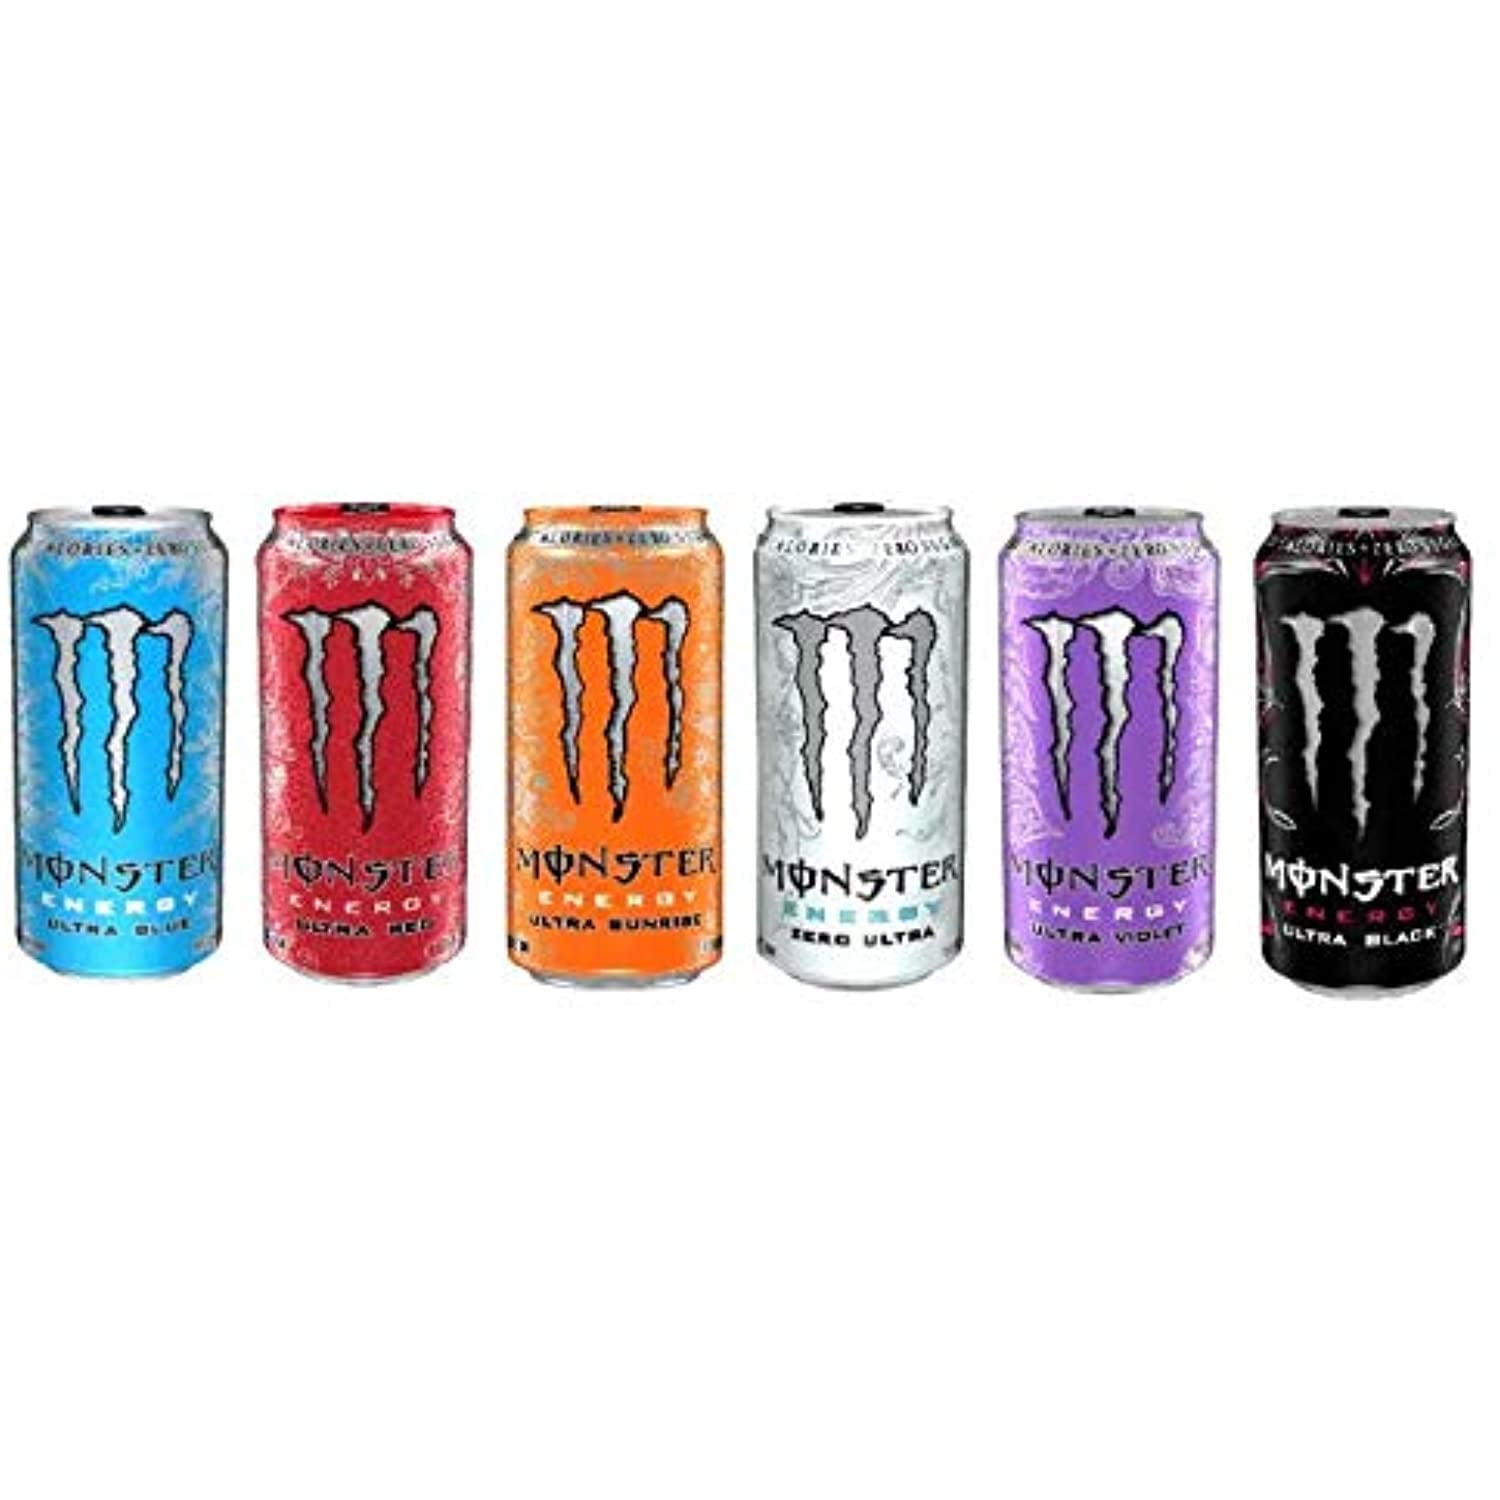 Energy Drink Variety Box (6 Cans) Please Read Description